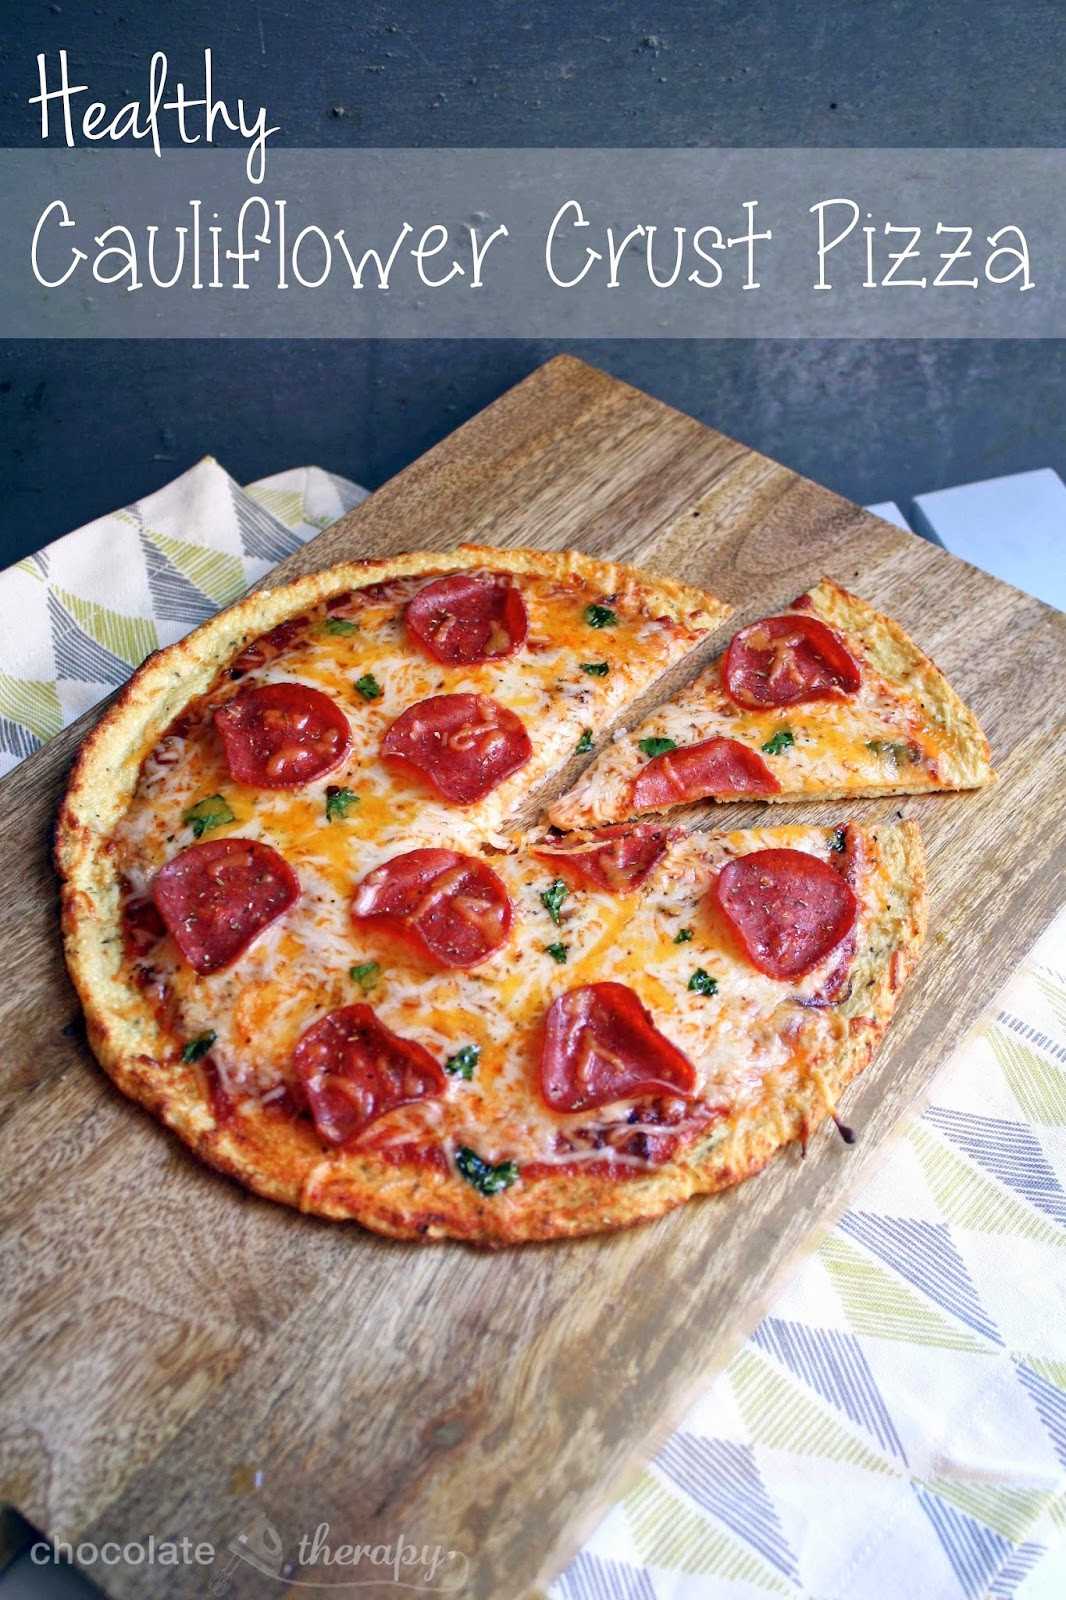 Healthy Pizza Crusts
 Chocolate Therapy Healthy Cauliflower Crust Pizza